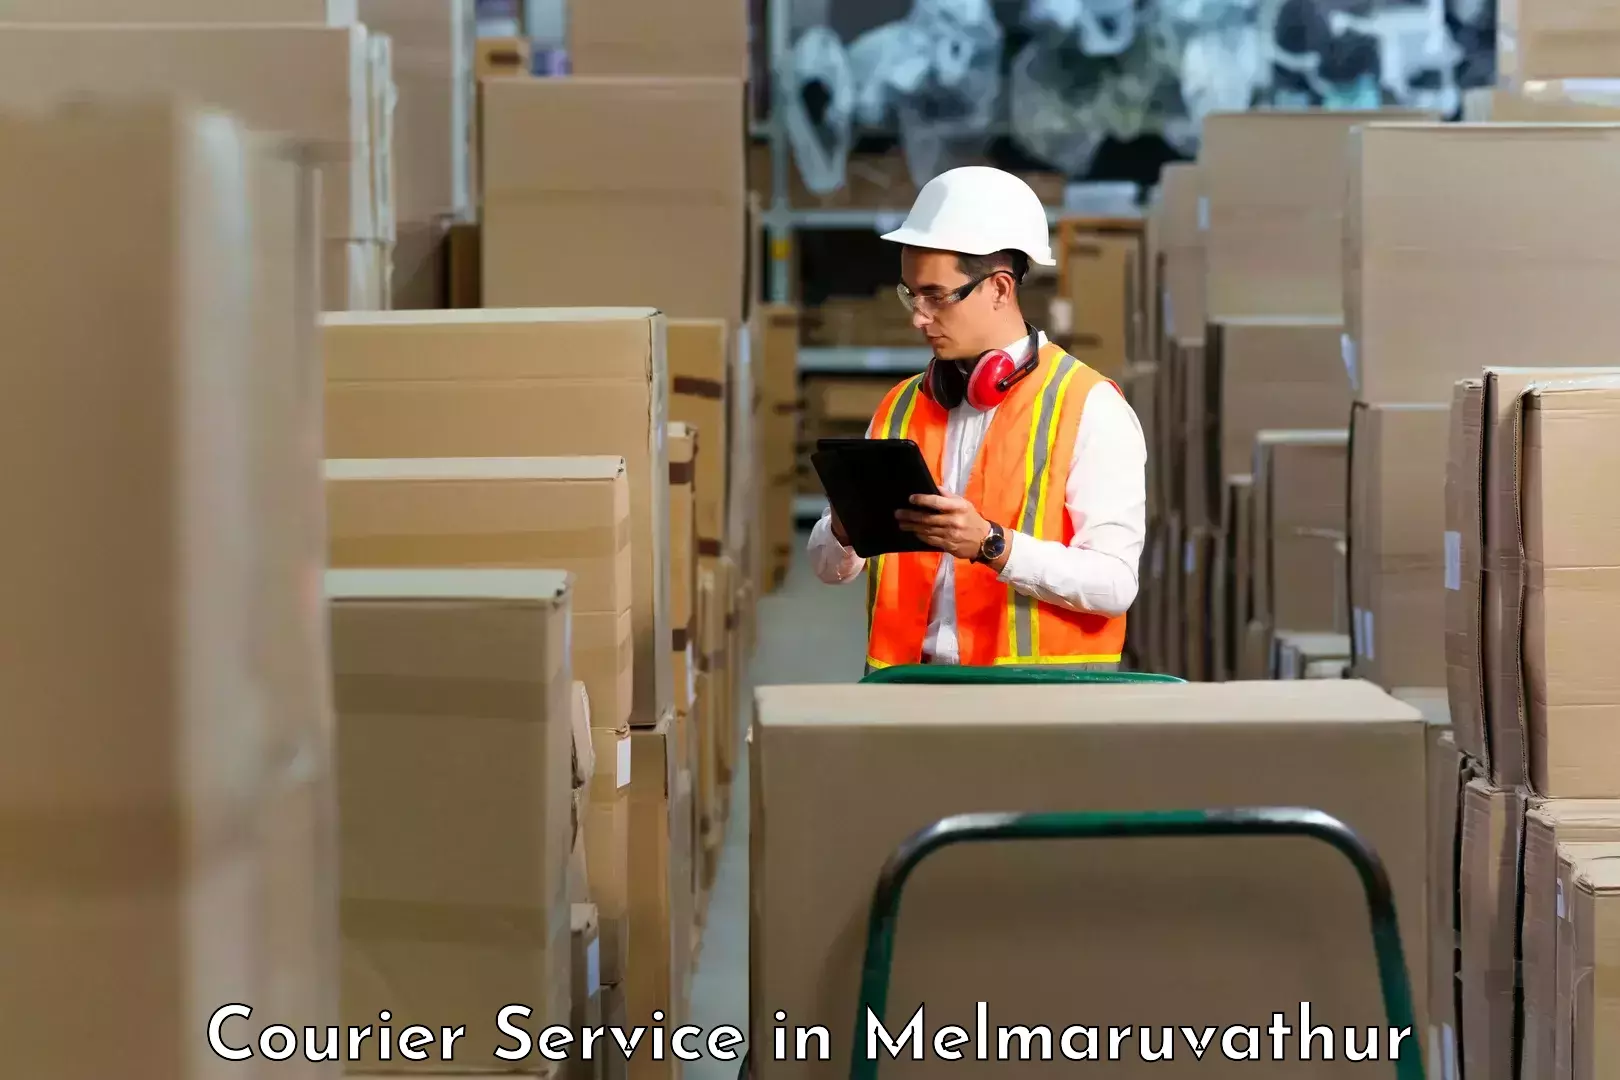 Fastest parcel delivery in Melmaruvathur